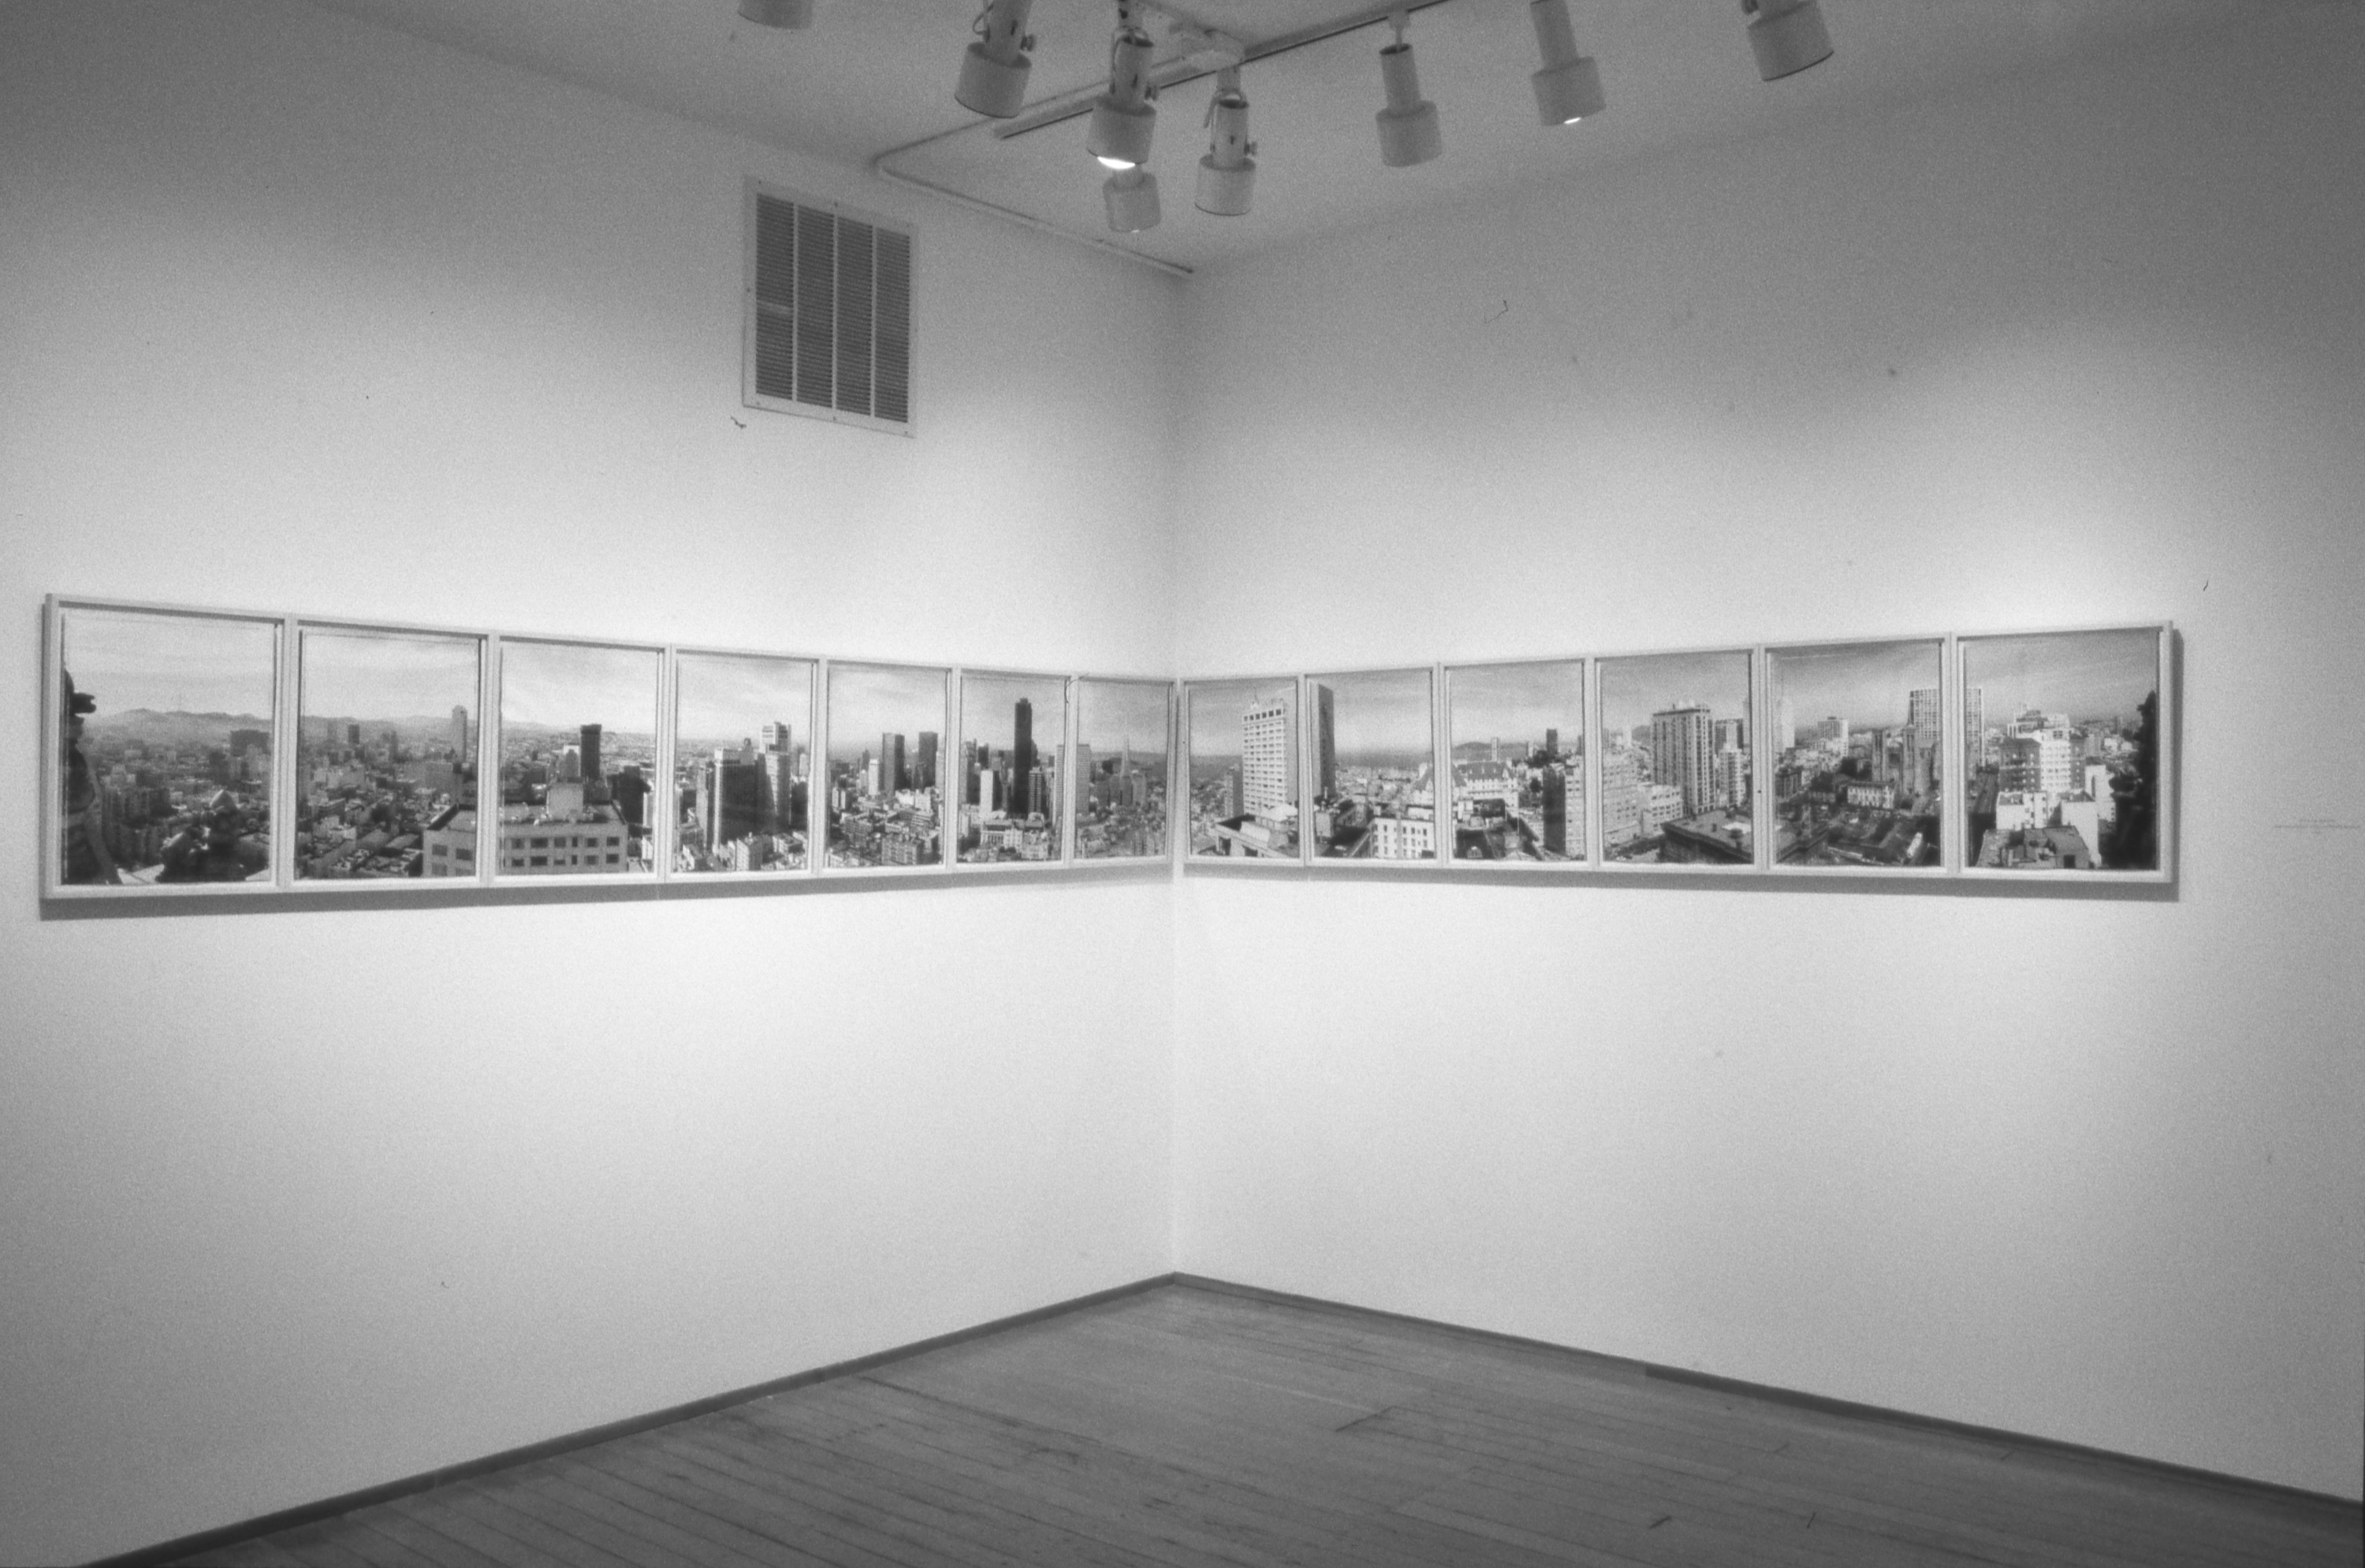 Installation photograph of framed prints on gallery walls